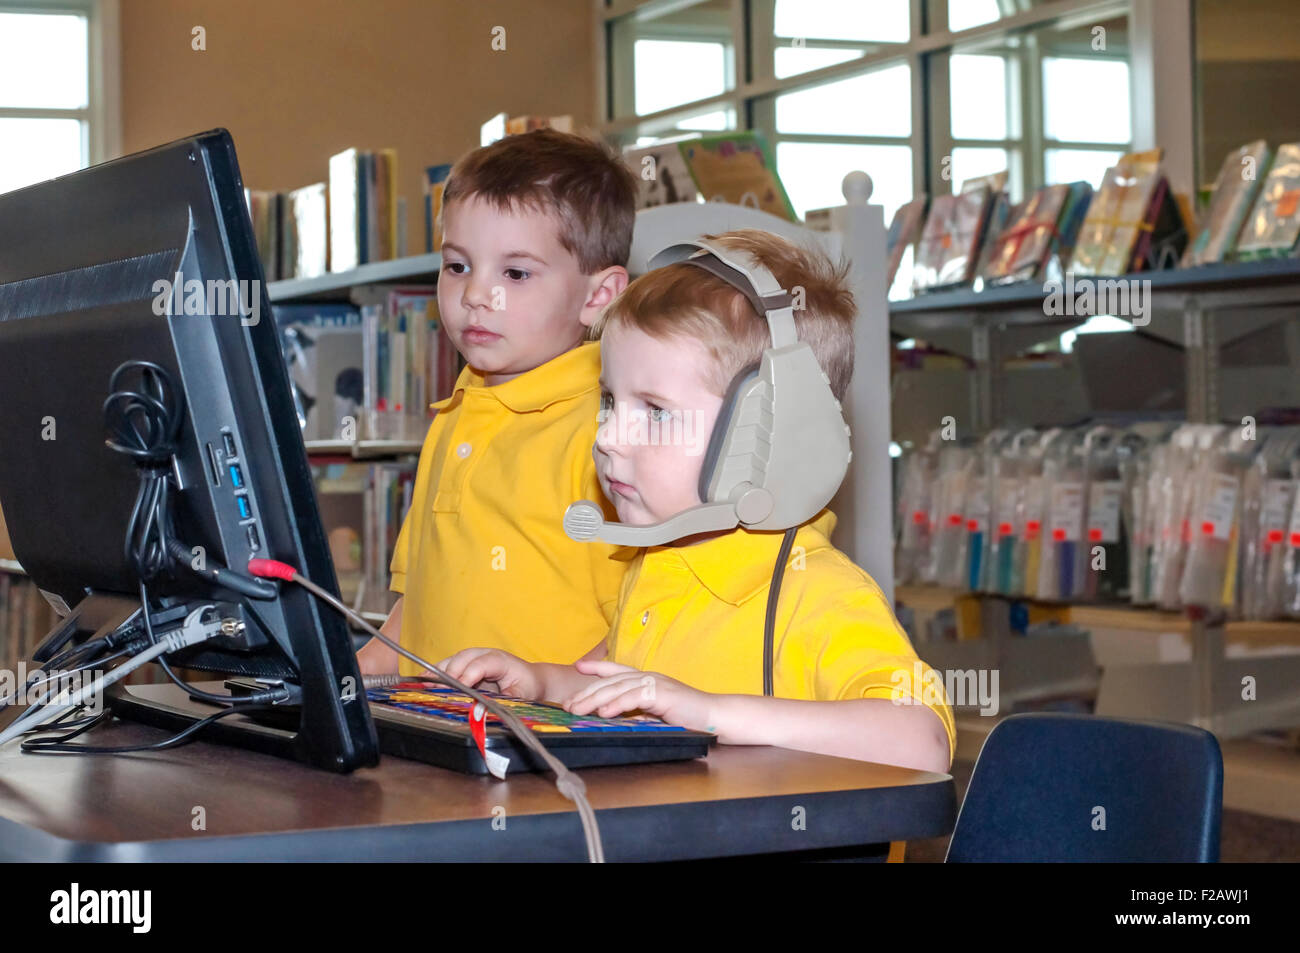 kids in library using computer Stock Photo